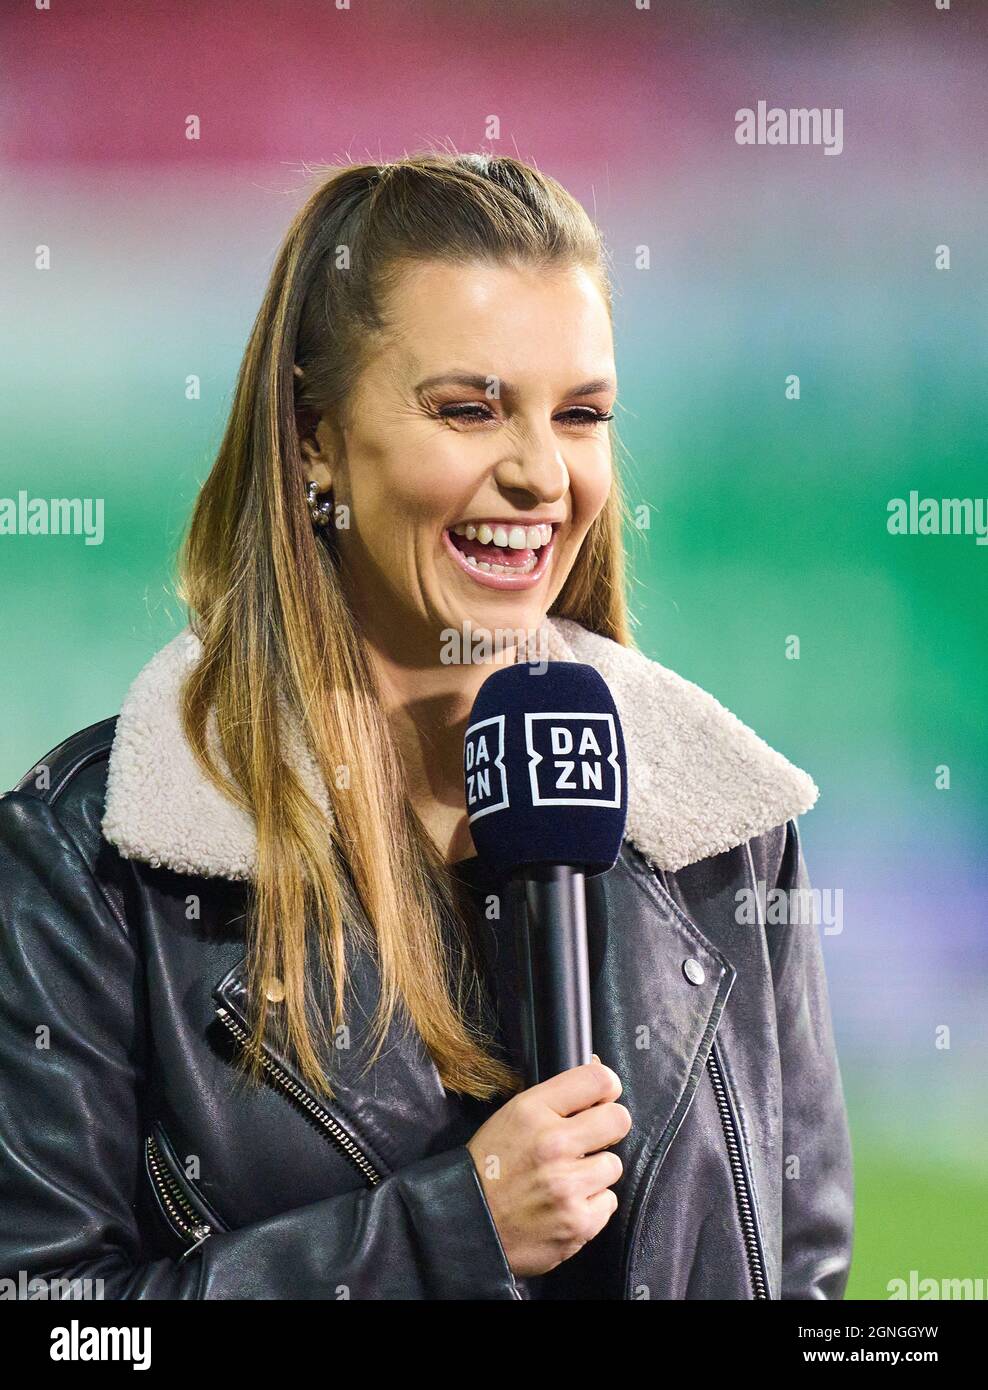 Laura WONTORRA, sports presenter, reporter, woman, moderator, TV, television, DAZN in the match SpVgg GREUTHER FÜRTH - FC BAYERN MUENCHEN 1-3 1.German Football League on September 24, 2021 in Fuerth, Germany. Season 2021/2022, matchday 7, 1.Bundesliga, FCB, München, 7.Spieltag. © Peter Schatz / Alamy Live News    - DFL REGULATIONS PROHIBIT ANY USE OF PHOTOGRAPHS as IMAGE SEQUENCES and/or QUASI-VIDEO - Stock Photo